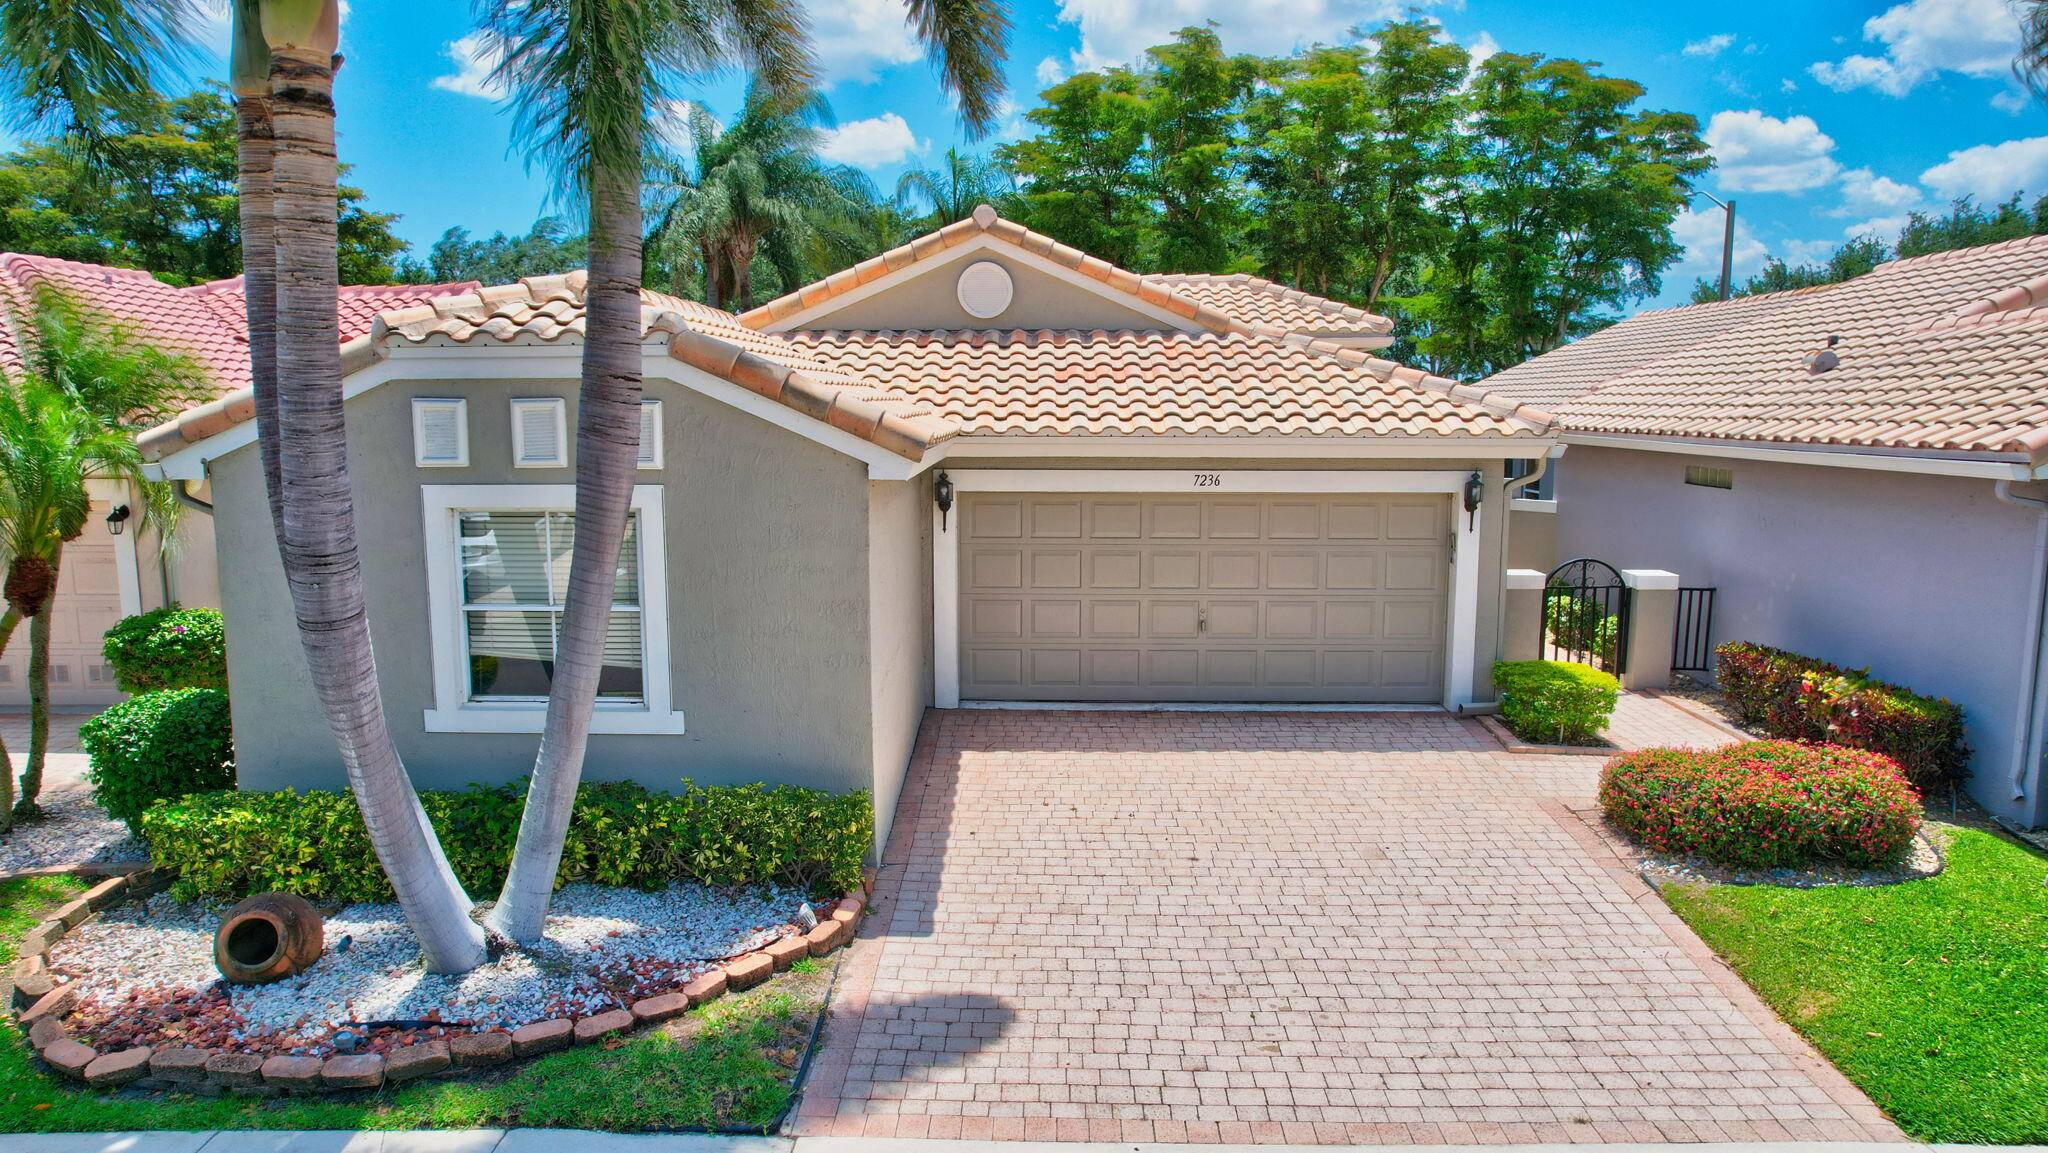 Opportunity is knocking and you better hurry and answer the door to this great West Boynton Beach home located in the Cascades !